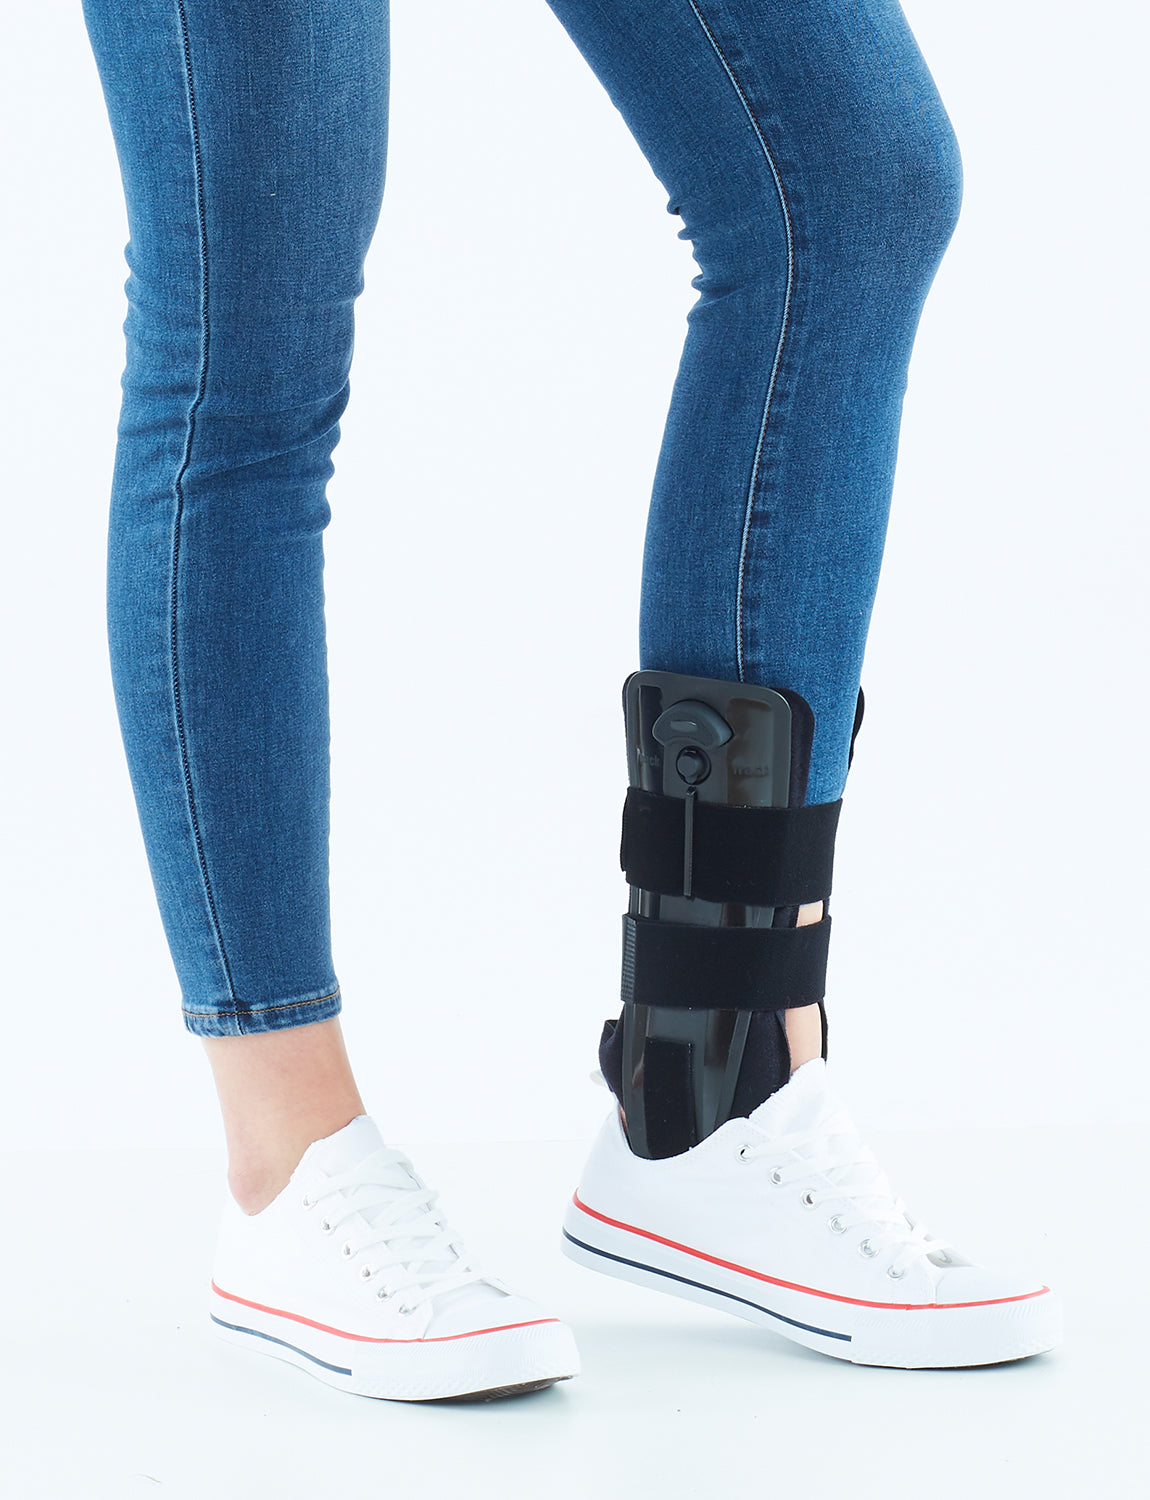 Adjusta-Fit Ankle Brace with Air Cushions